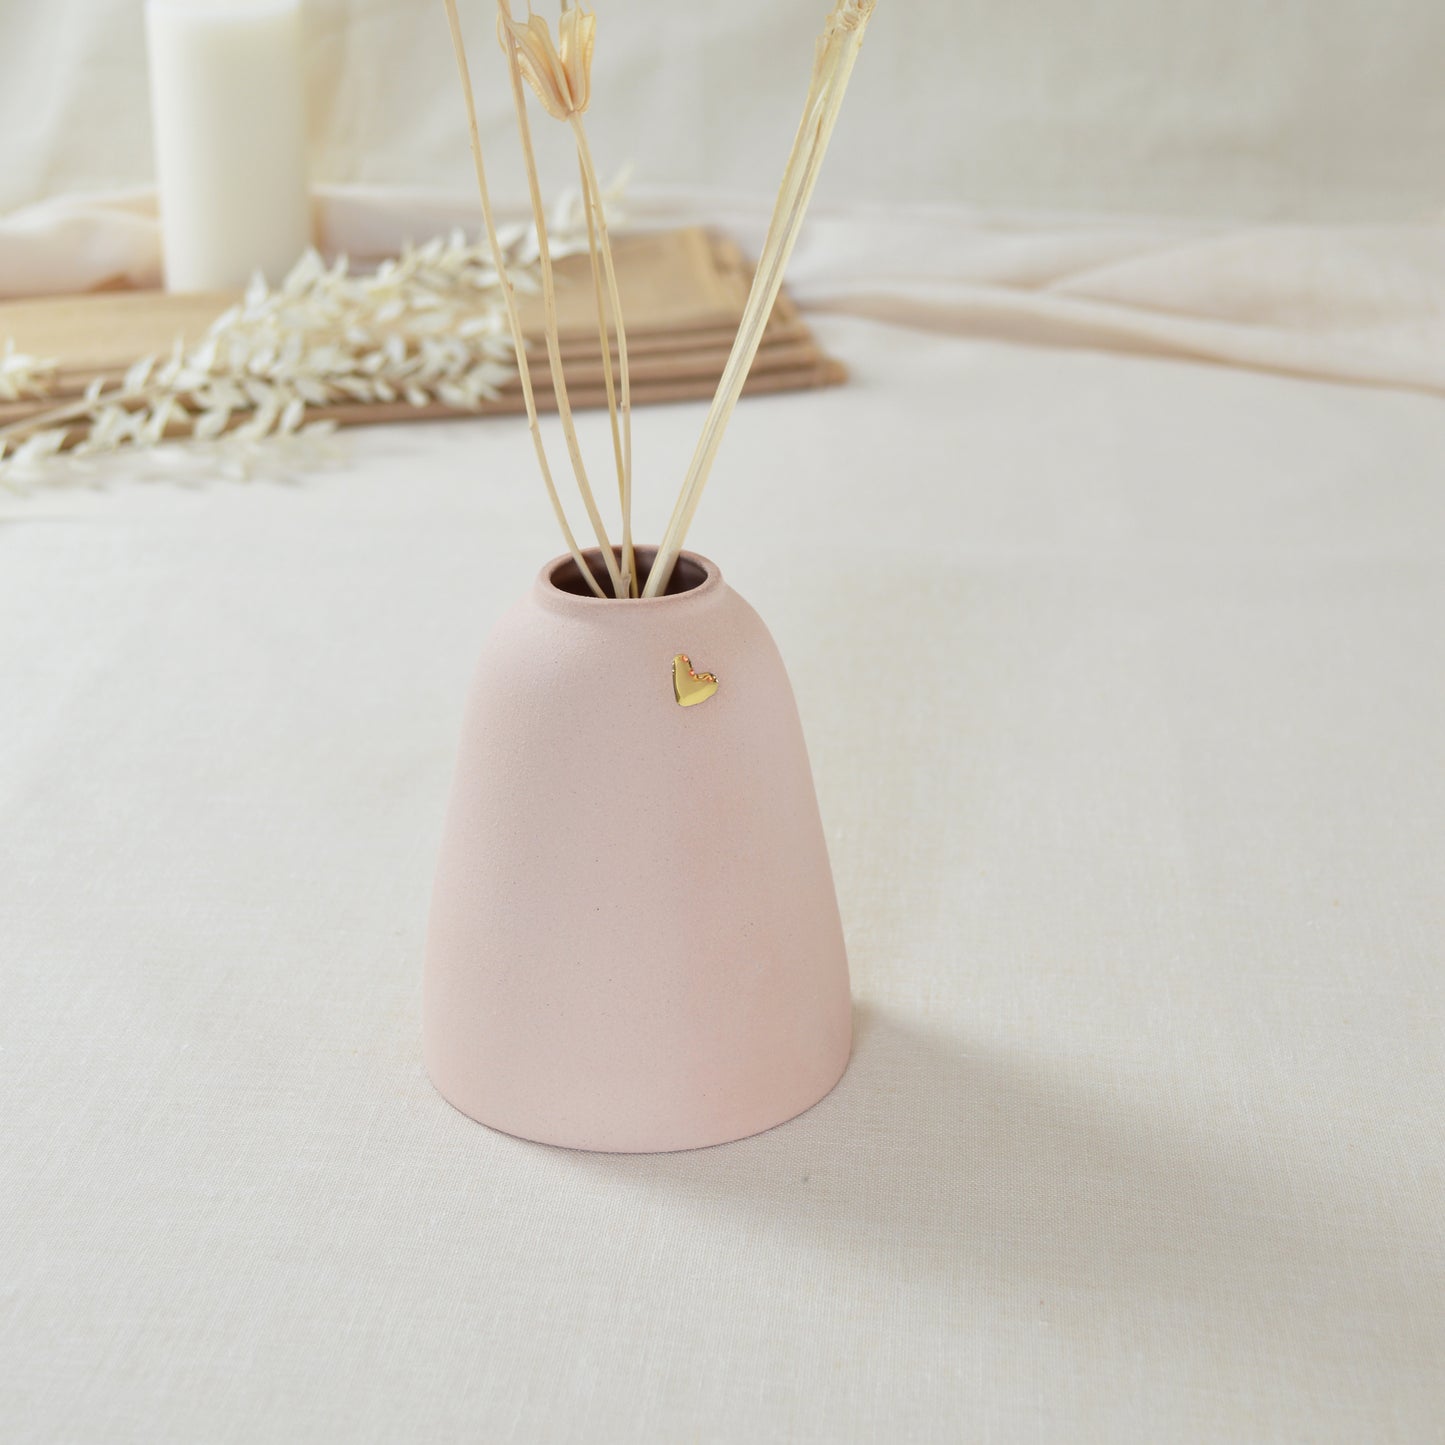 Pastel Pink Ceramic Vase With A Short Rim And An Embossed Gold Heart | Pretty Pink Decor | Mother's Day Vase | Stoneware